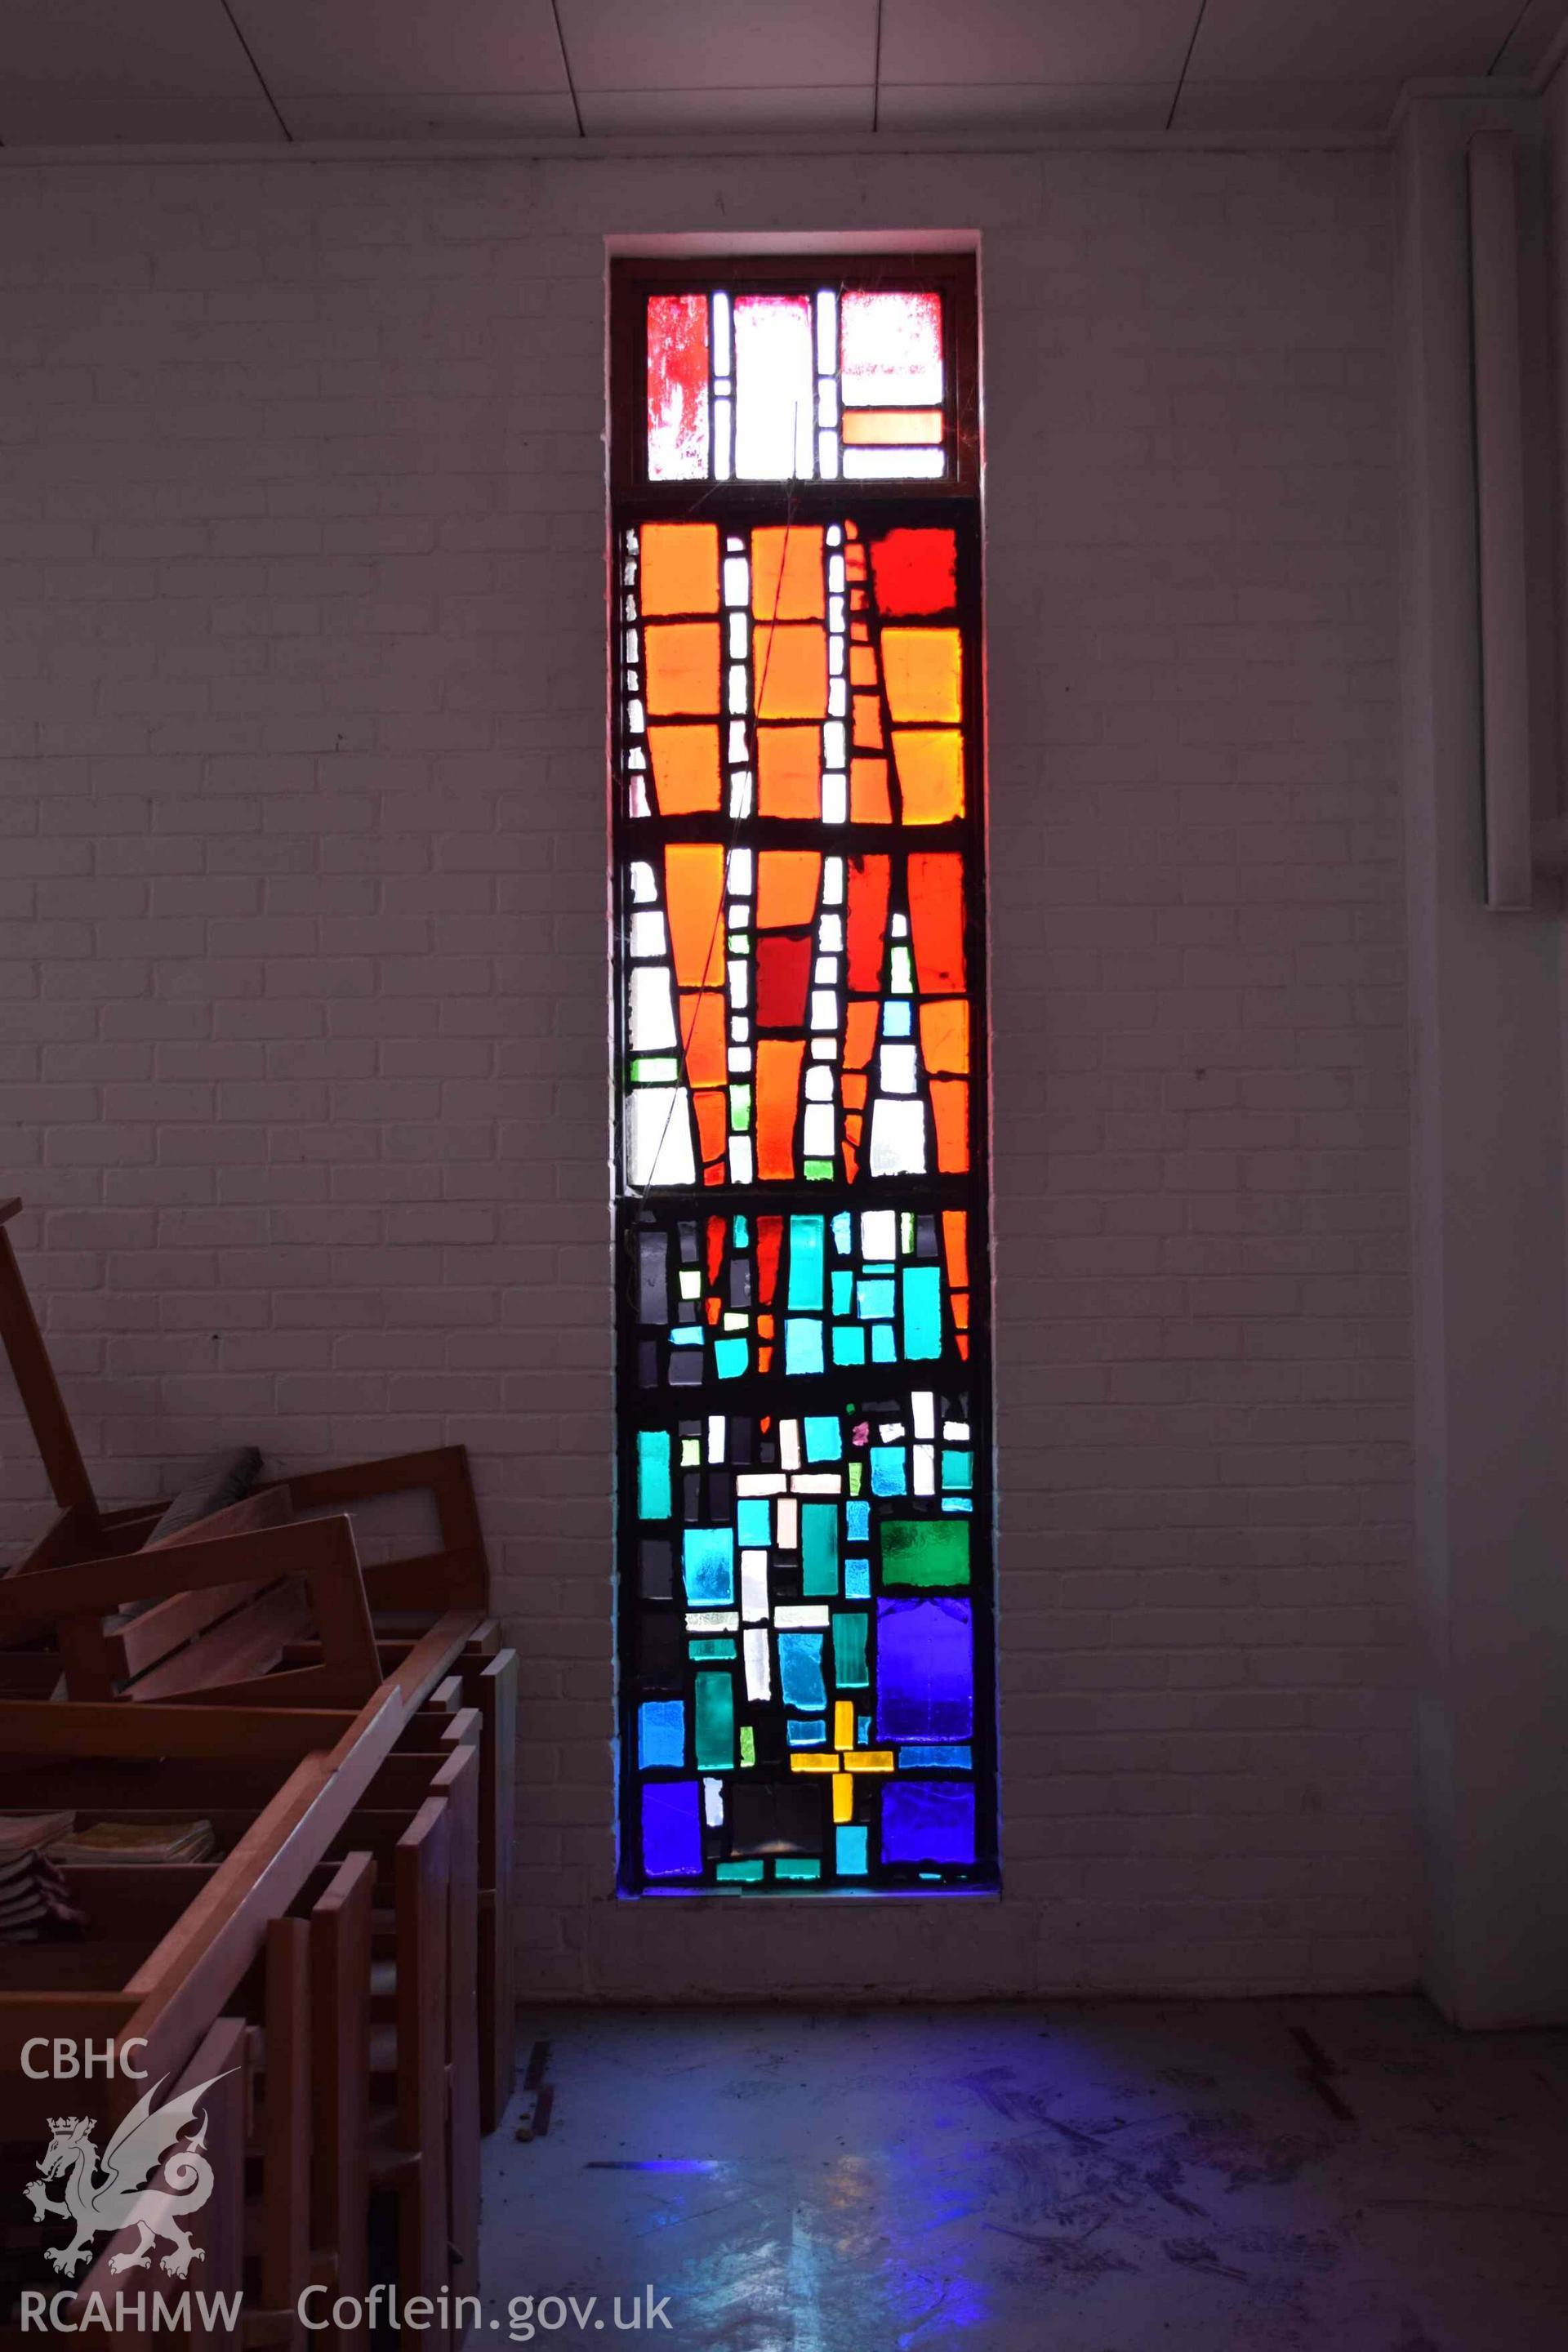 Photograph showing a Jonah Jones Dalle de Verre window (1a), at the church of The Resurrection of Our Saviour, Morfa Nefyn, taken on behalf of the Architectural Glass Centre during the removal of the windows in March 2019.